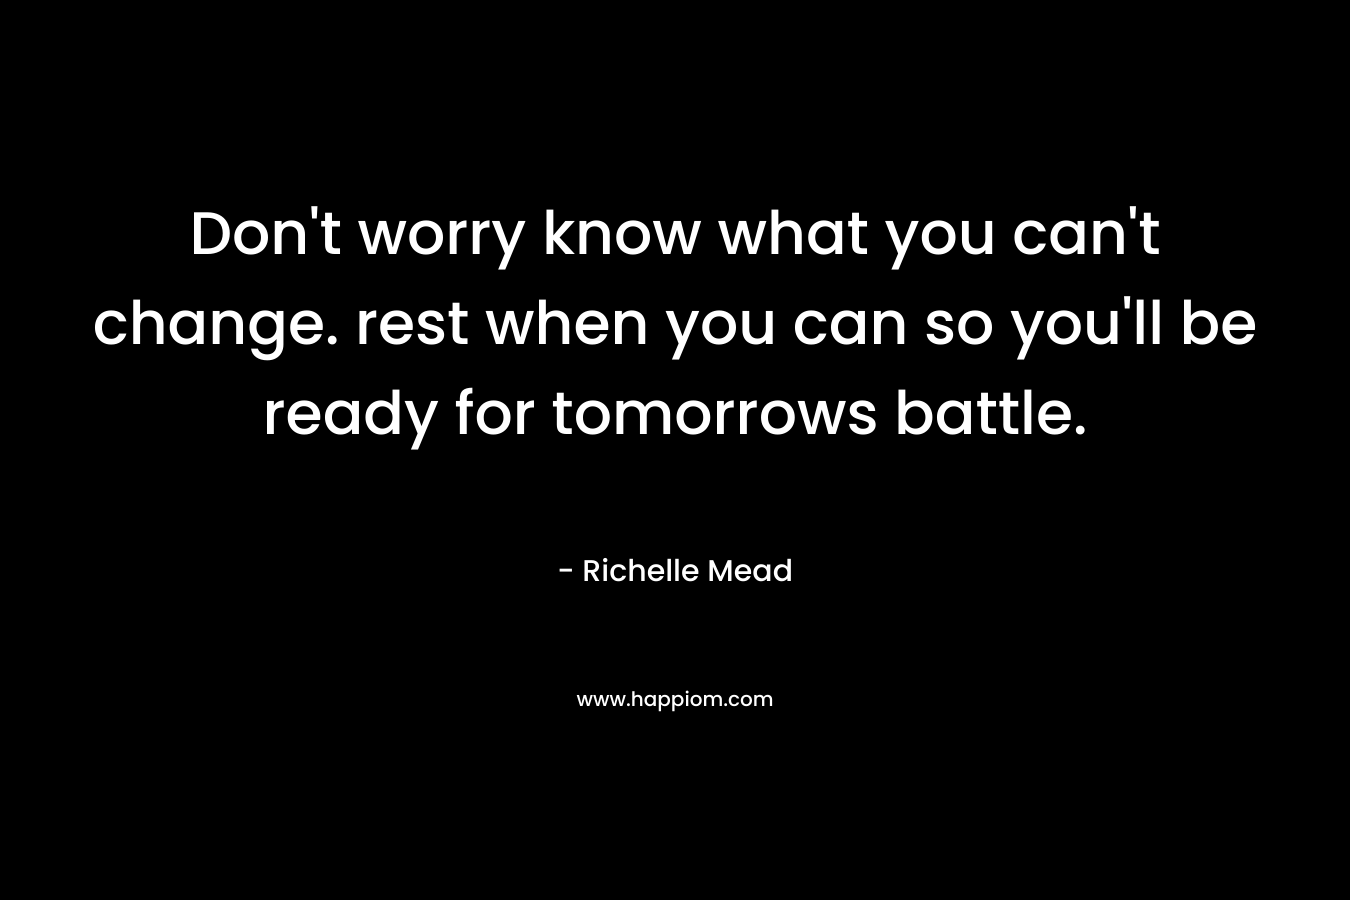 Don't worry know what you can't change. rest when you can so you'll be ready for tomorrows battle.